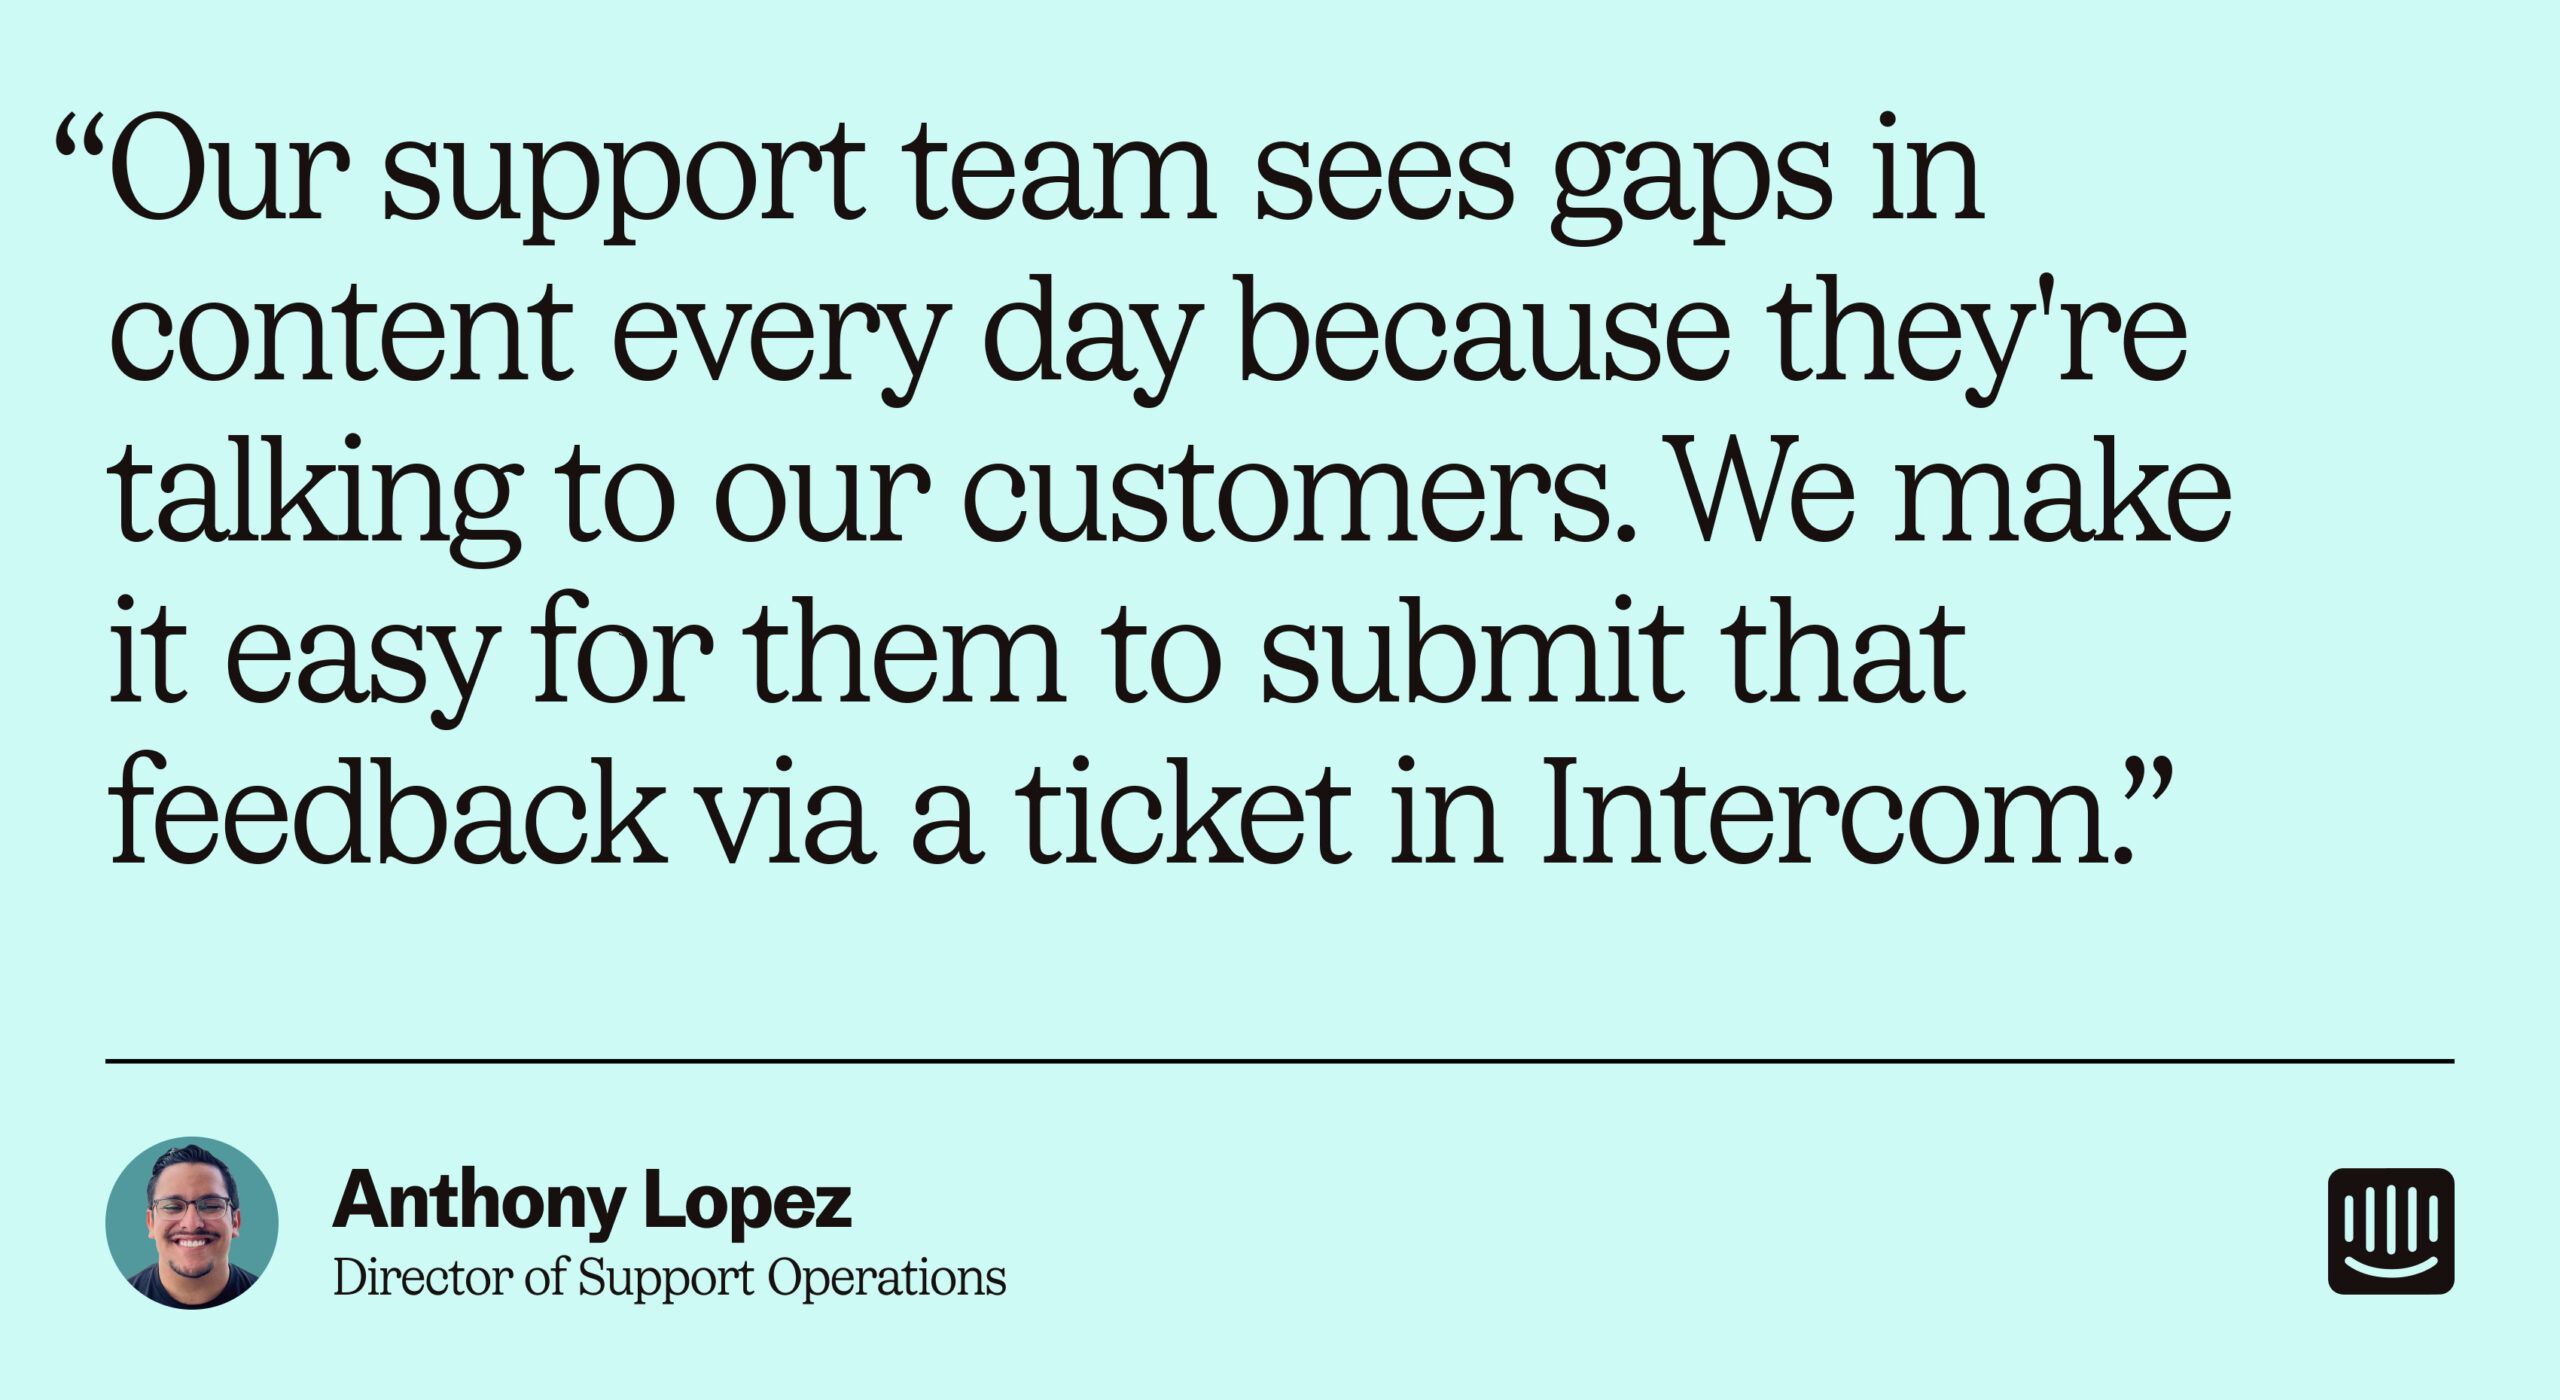 “Our support team sees gaps in content every day because they're talking to our customers. We make it easy for them to submit that feedback via a ticket in Intercom.” – Anthony Lopez, Director of Support Operations at Intercom